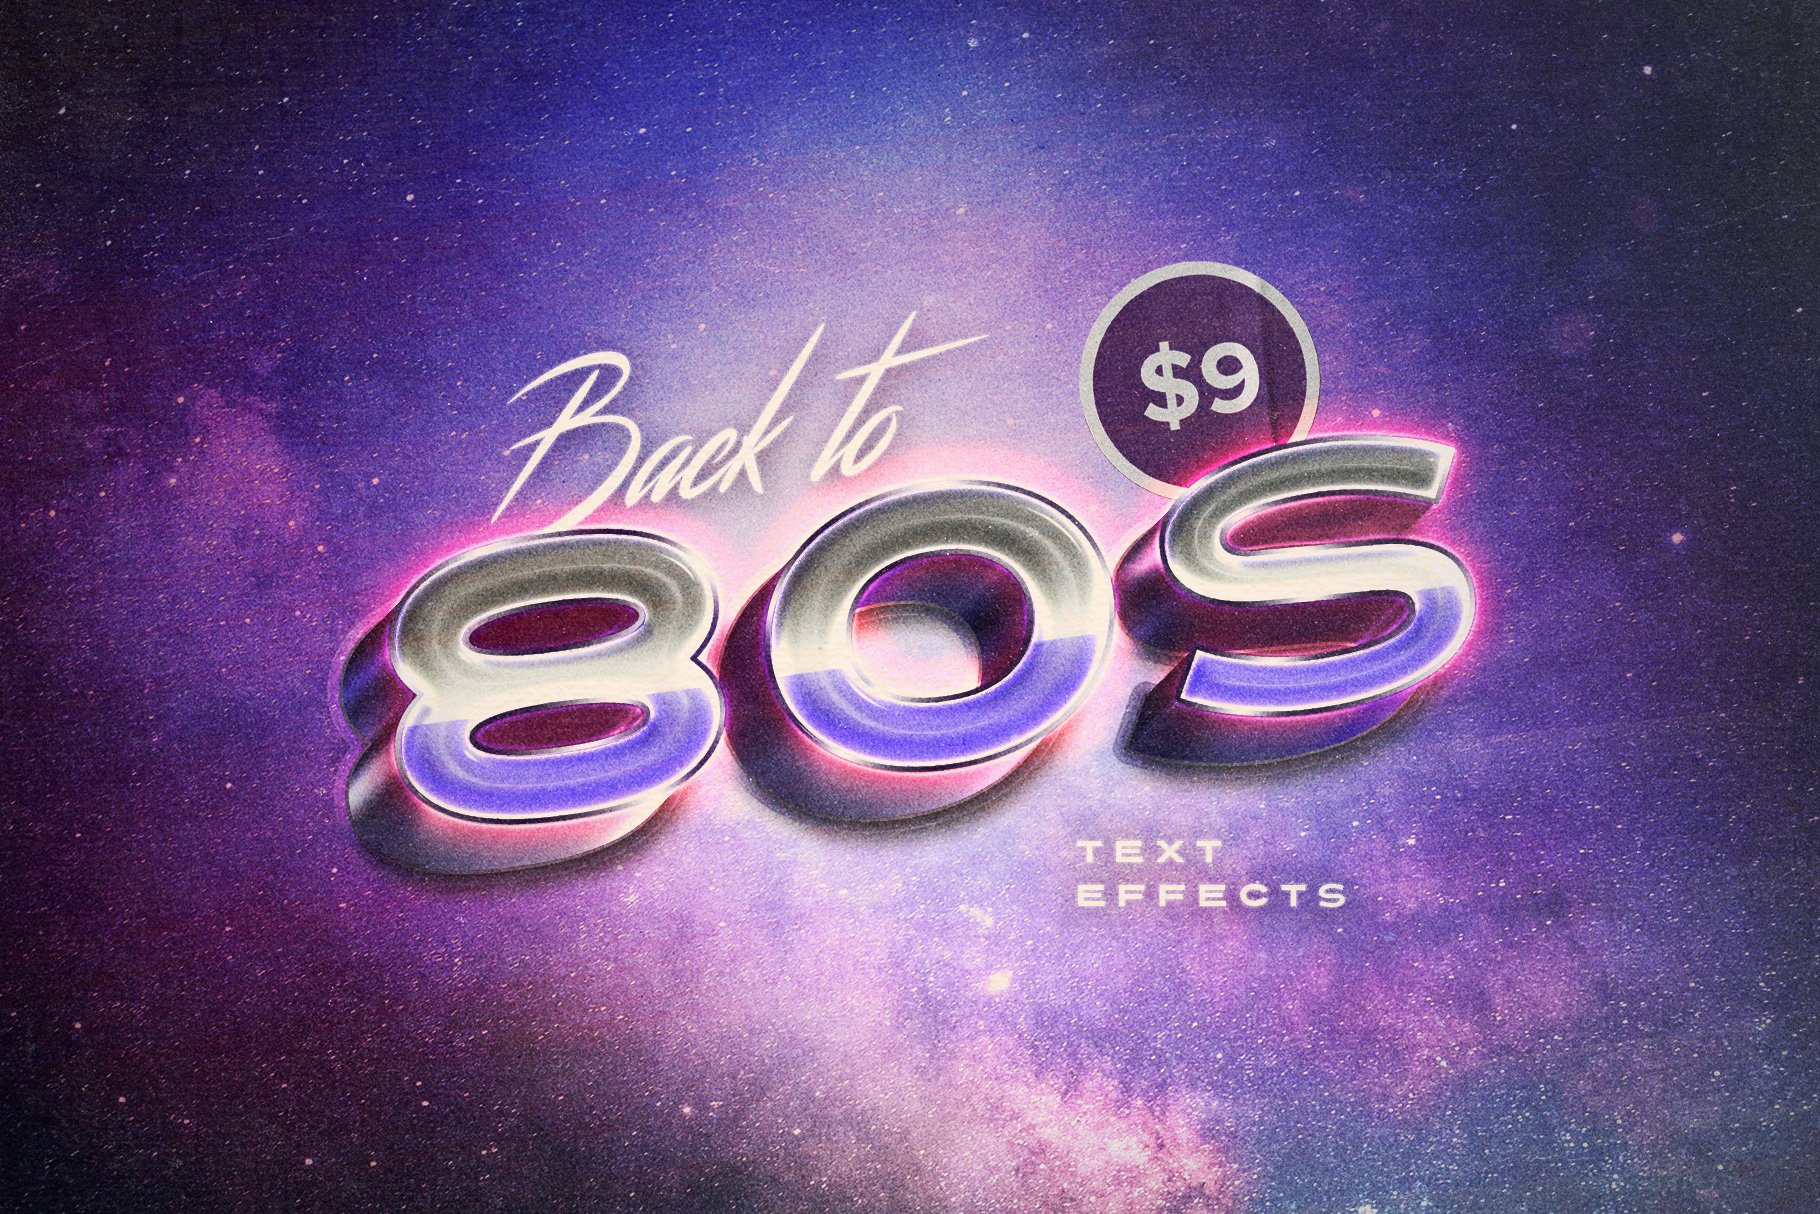 Back to the 80s Retro Text Effectscover image.